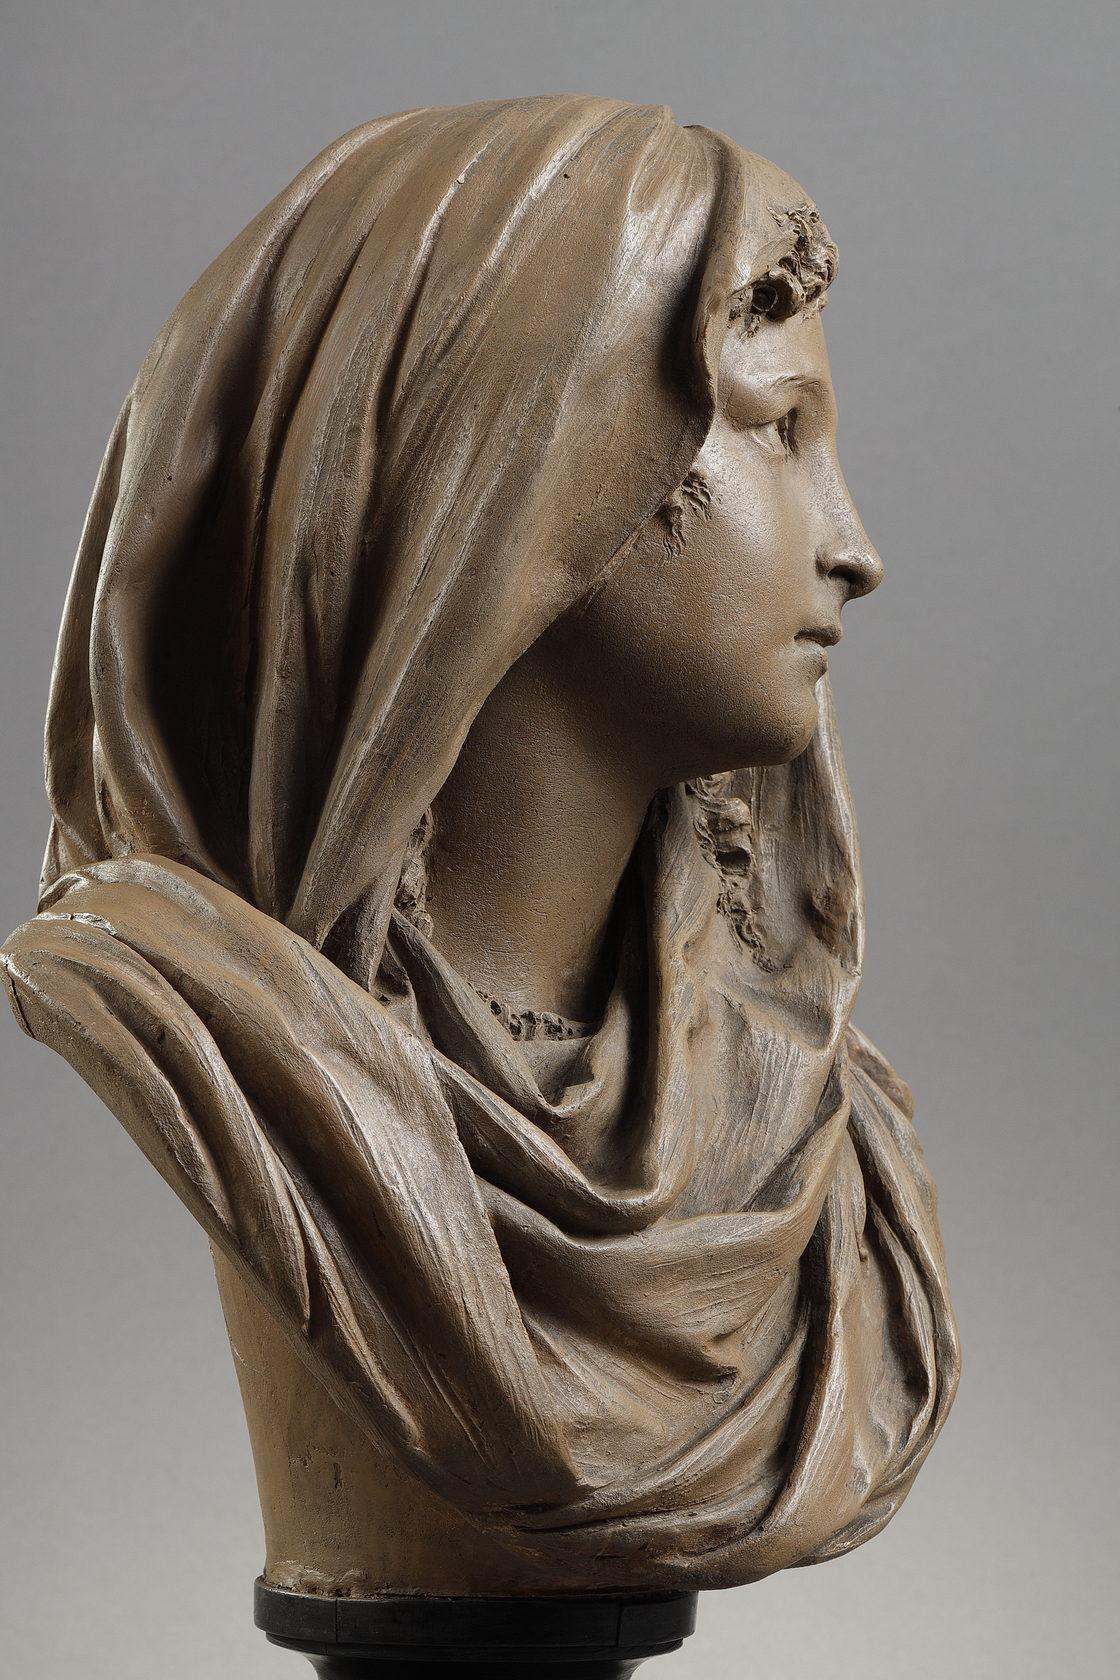 Bust of a young woman wearing a shawl
by Albert-Ernest Carrier-Belleuse (1824-1887)

Terracotta bust
Raised on a in blackened wood pedestal
signed 